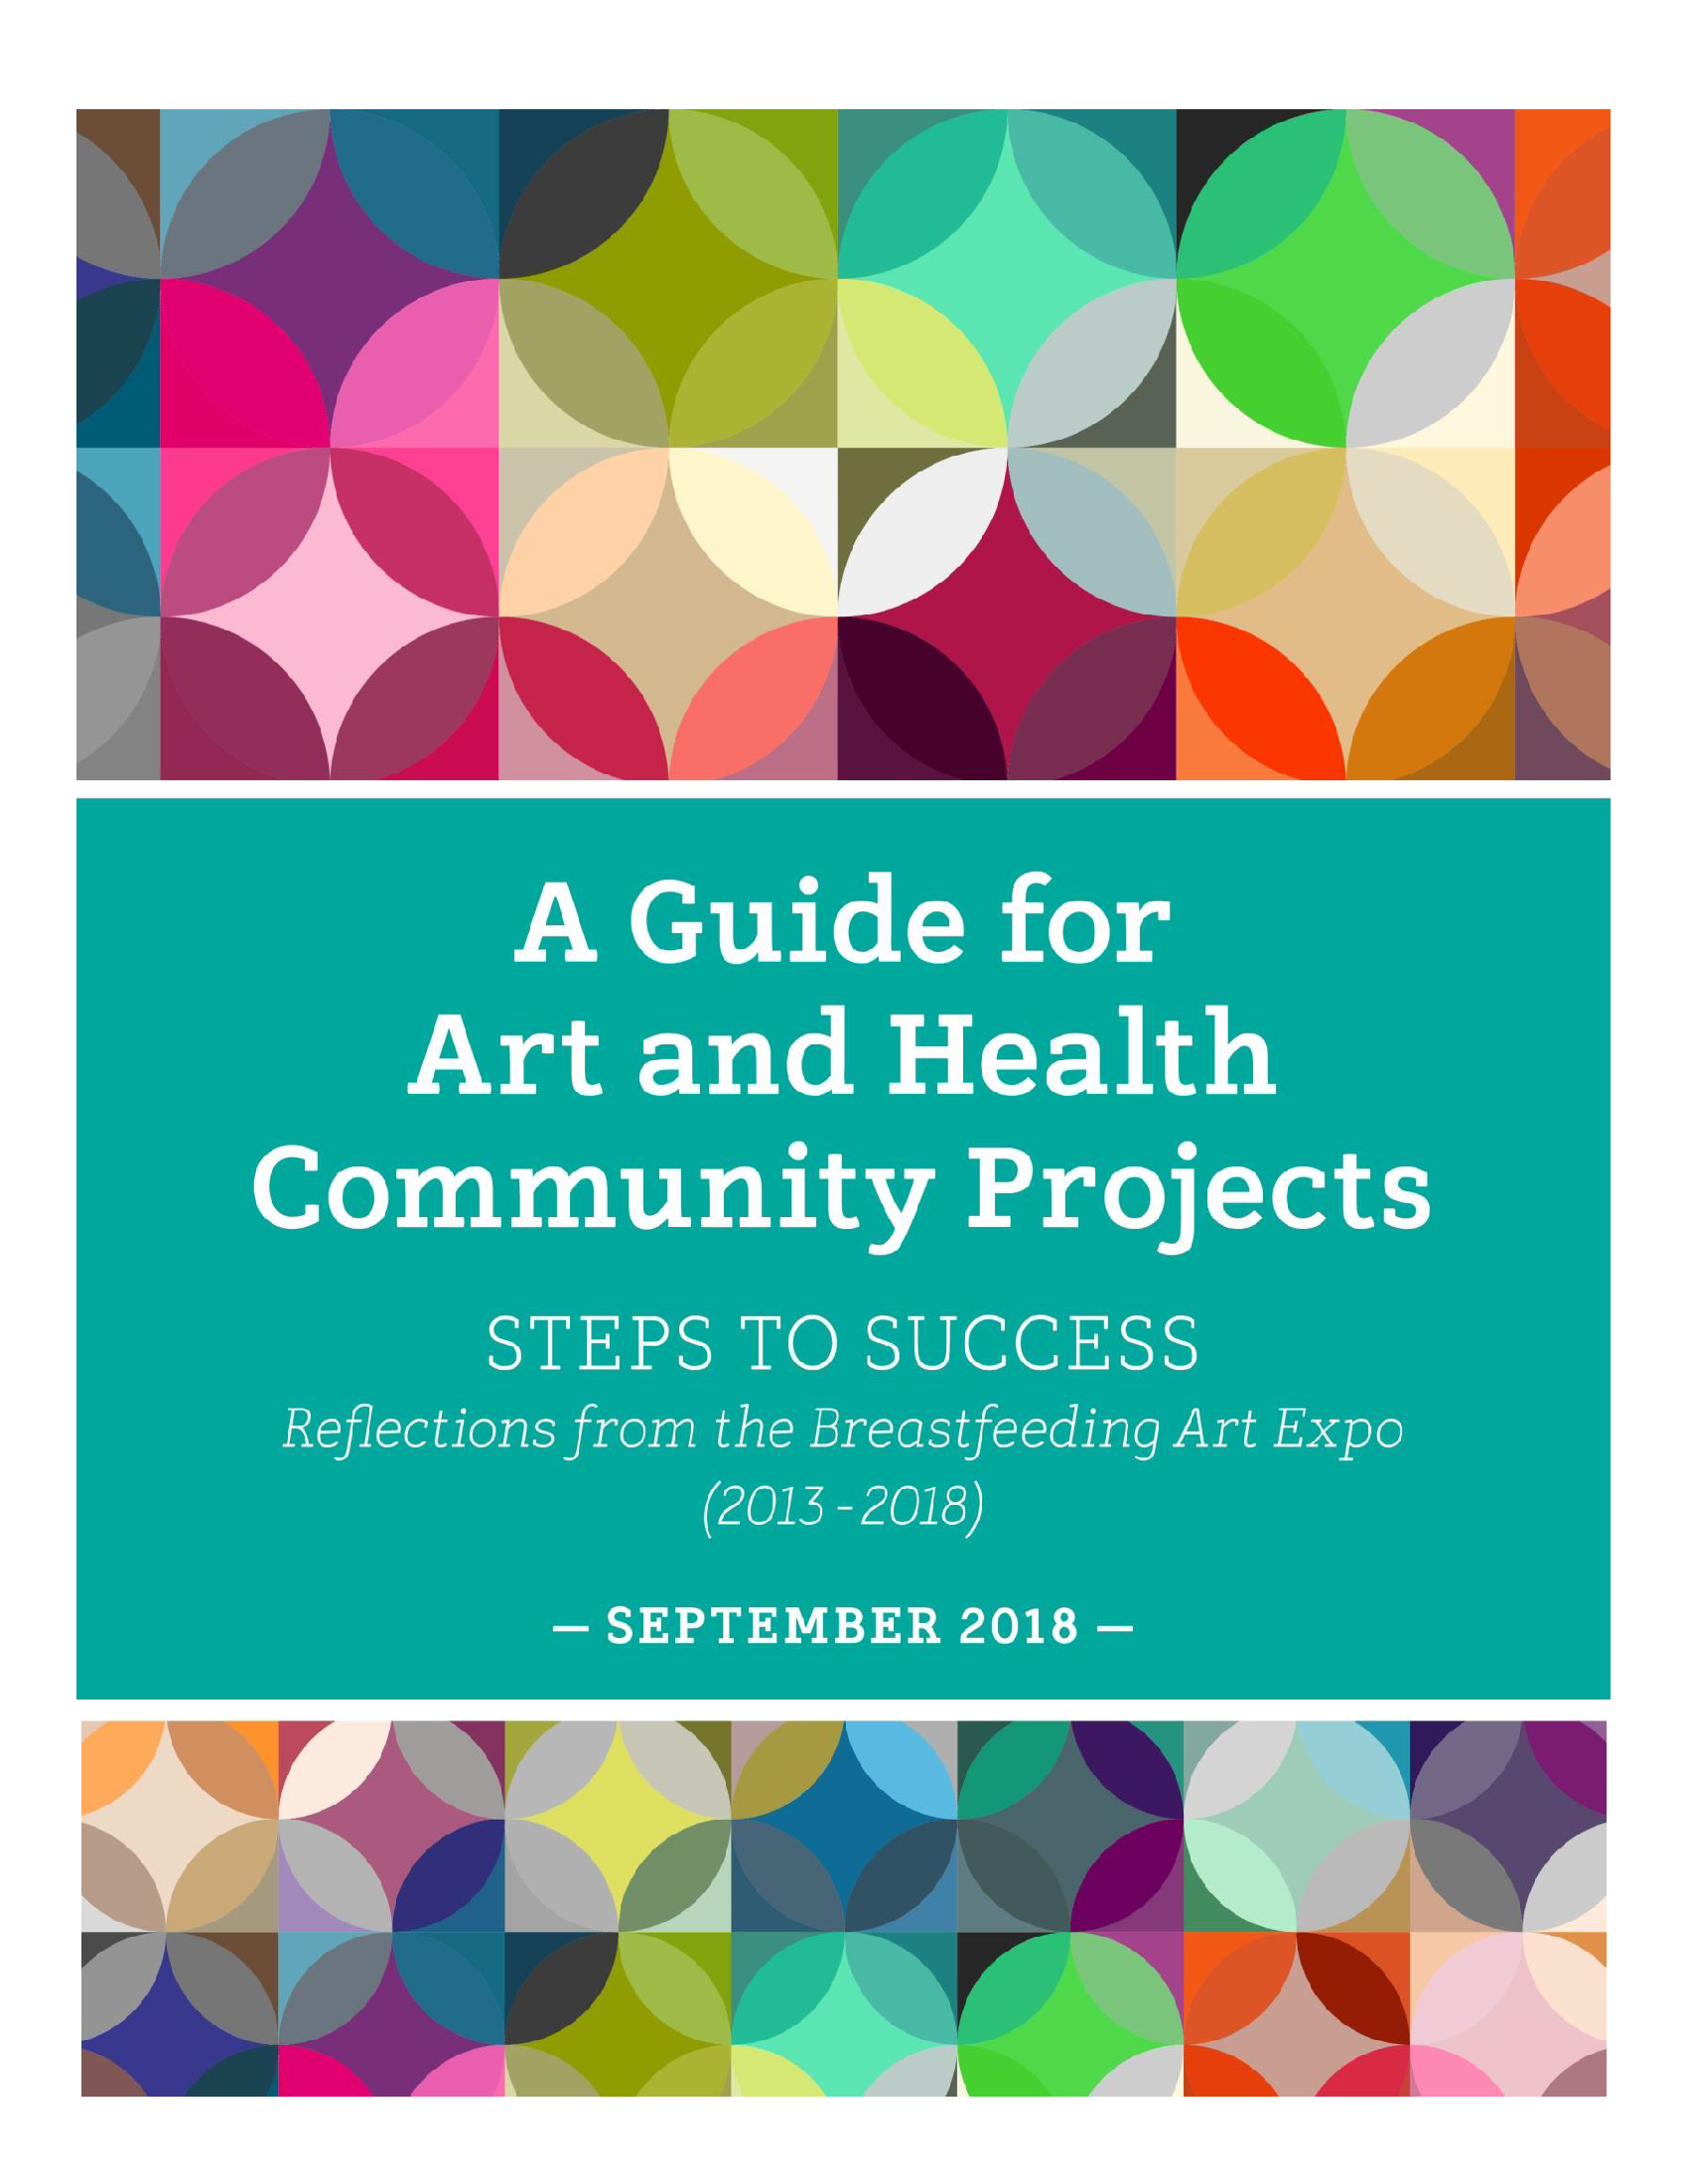 Breastfeeding Art Expo - A Guide for Art and Health Community Projects